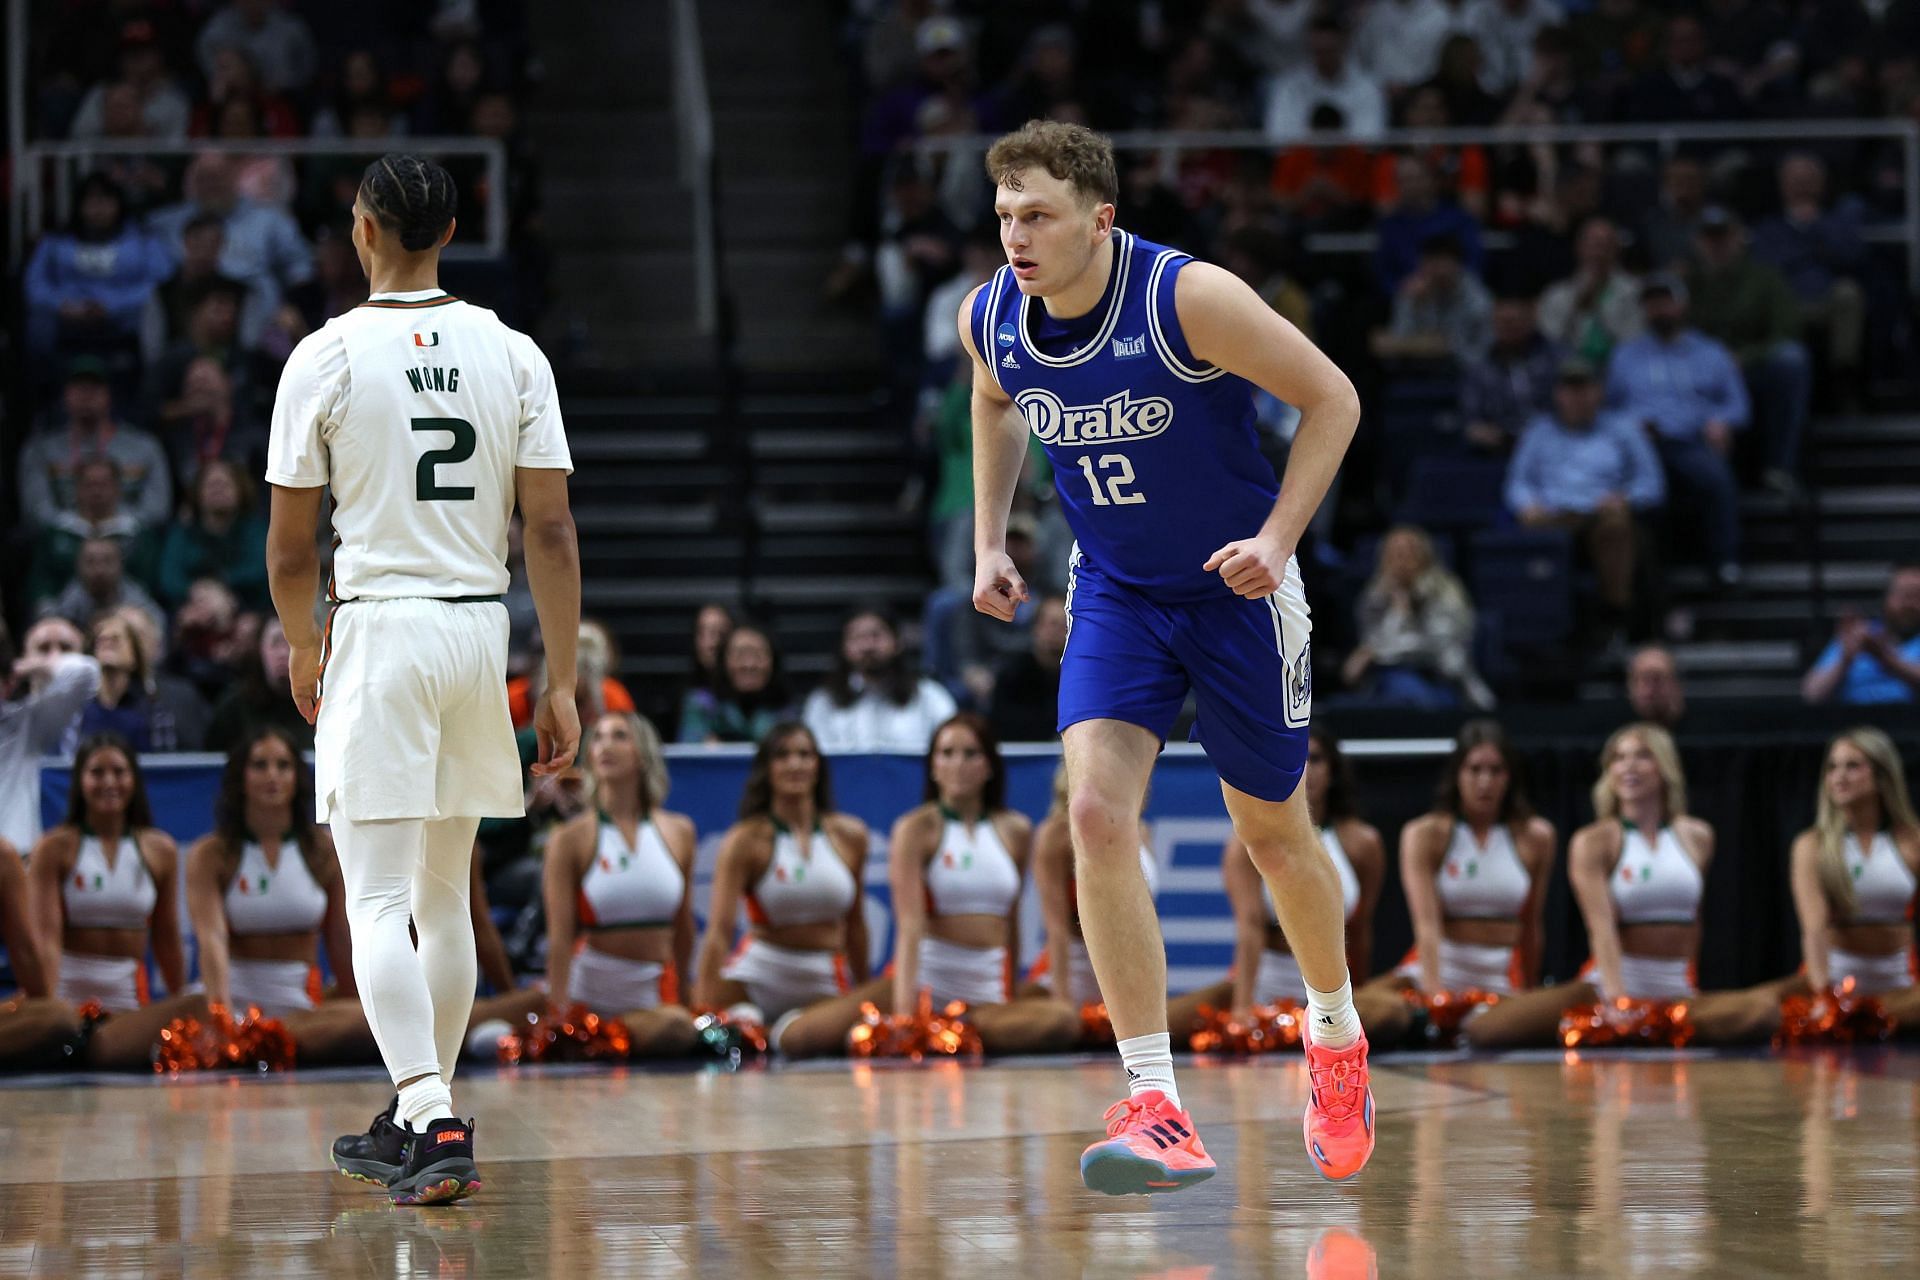 Drake guard Tucker DeVries secured his second-straight MVC Player of the Year on averages of 21.9 points, 6.9 rebounds, 3.5 assists, and 1.7 steals.